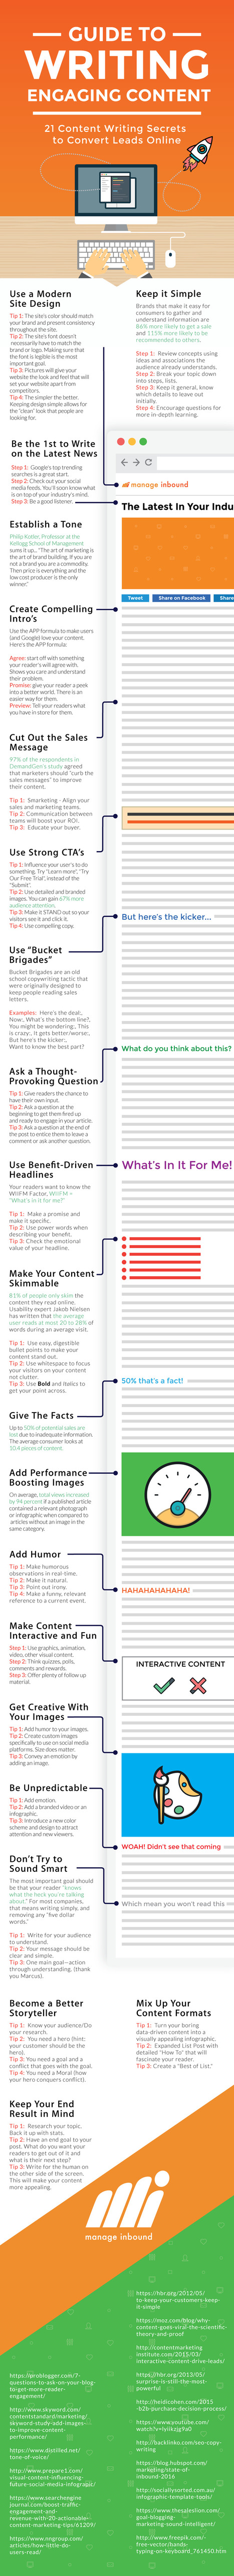 21 Actionable Tips To Make Your Content More Attractive #Infographic | Rapid eLearning | Scoop.it